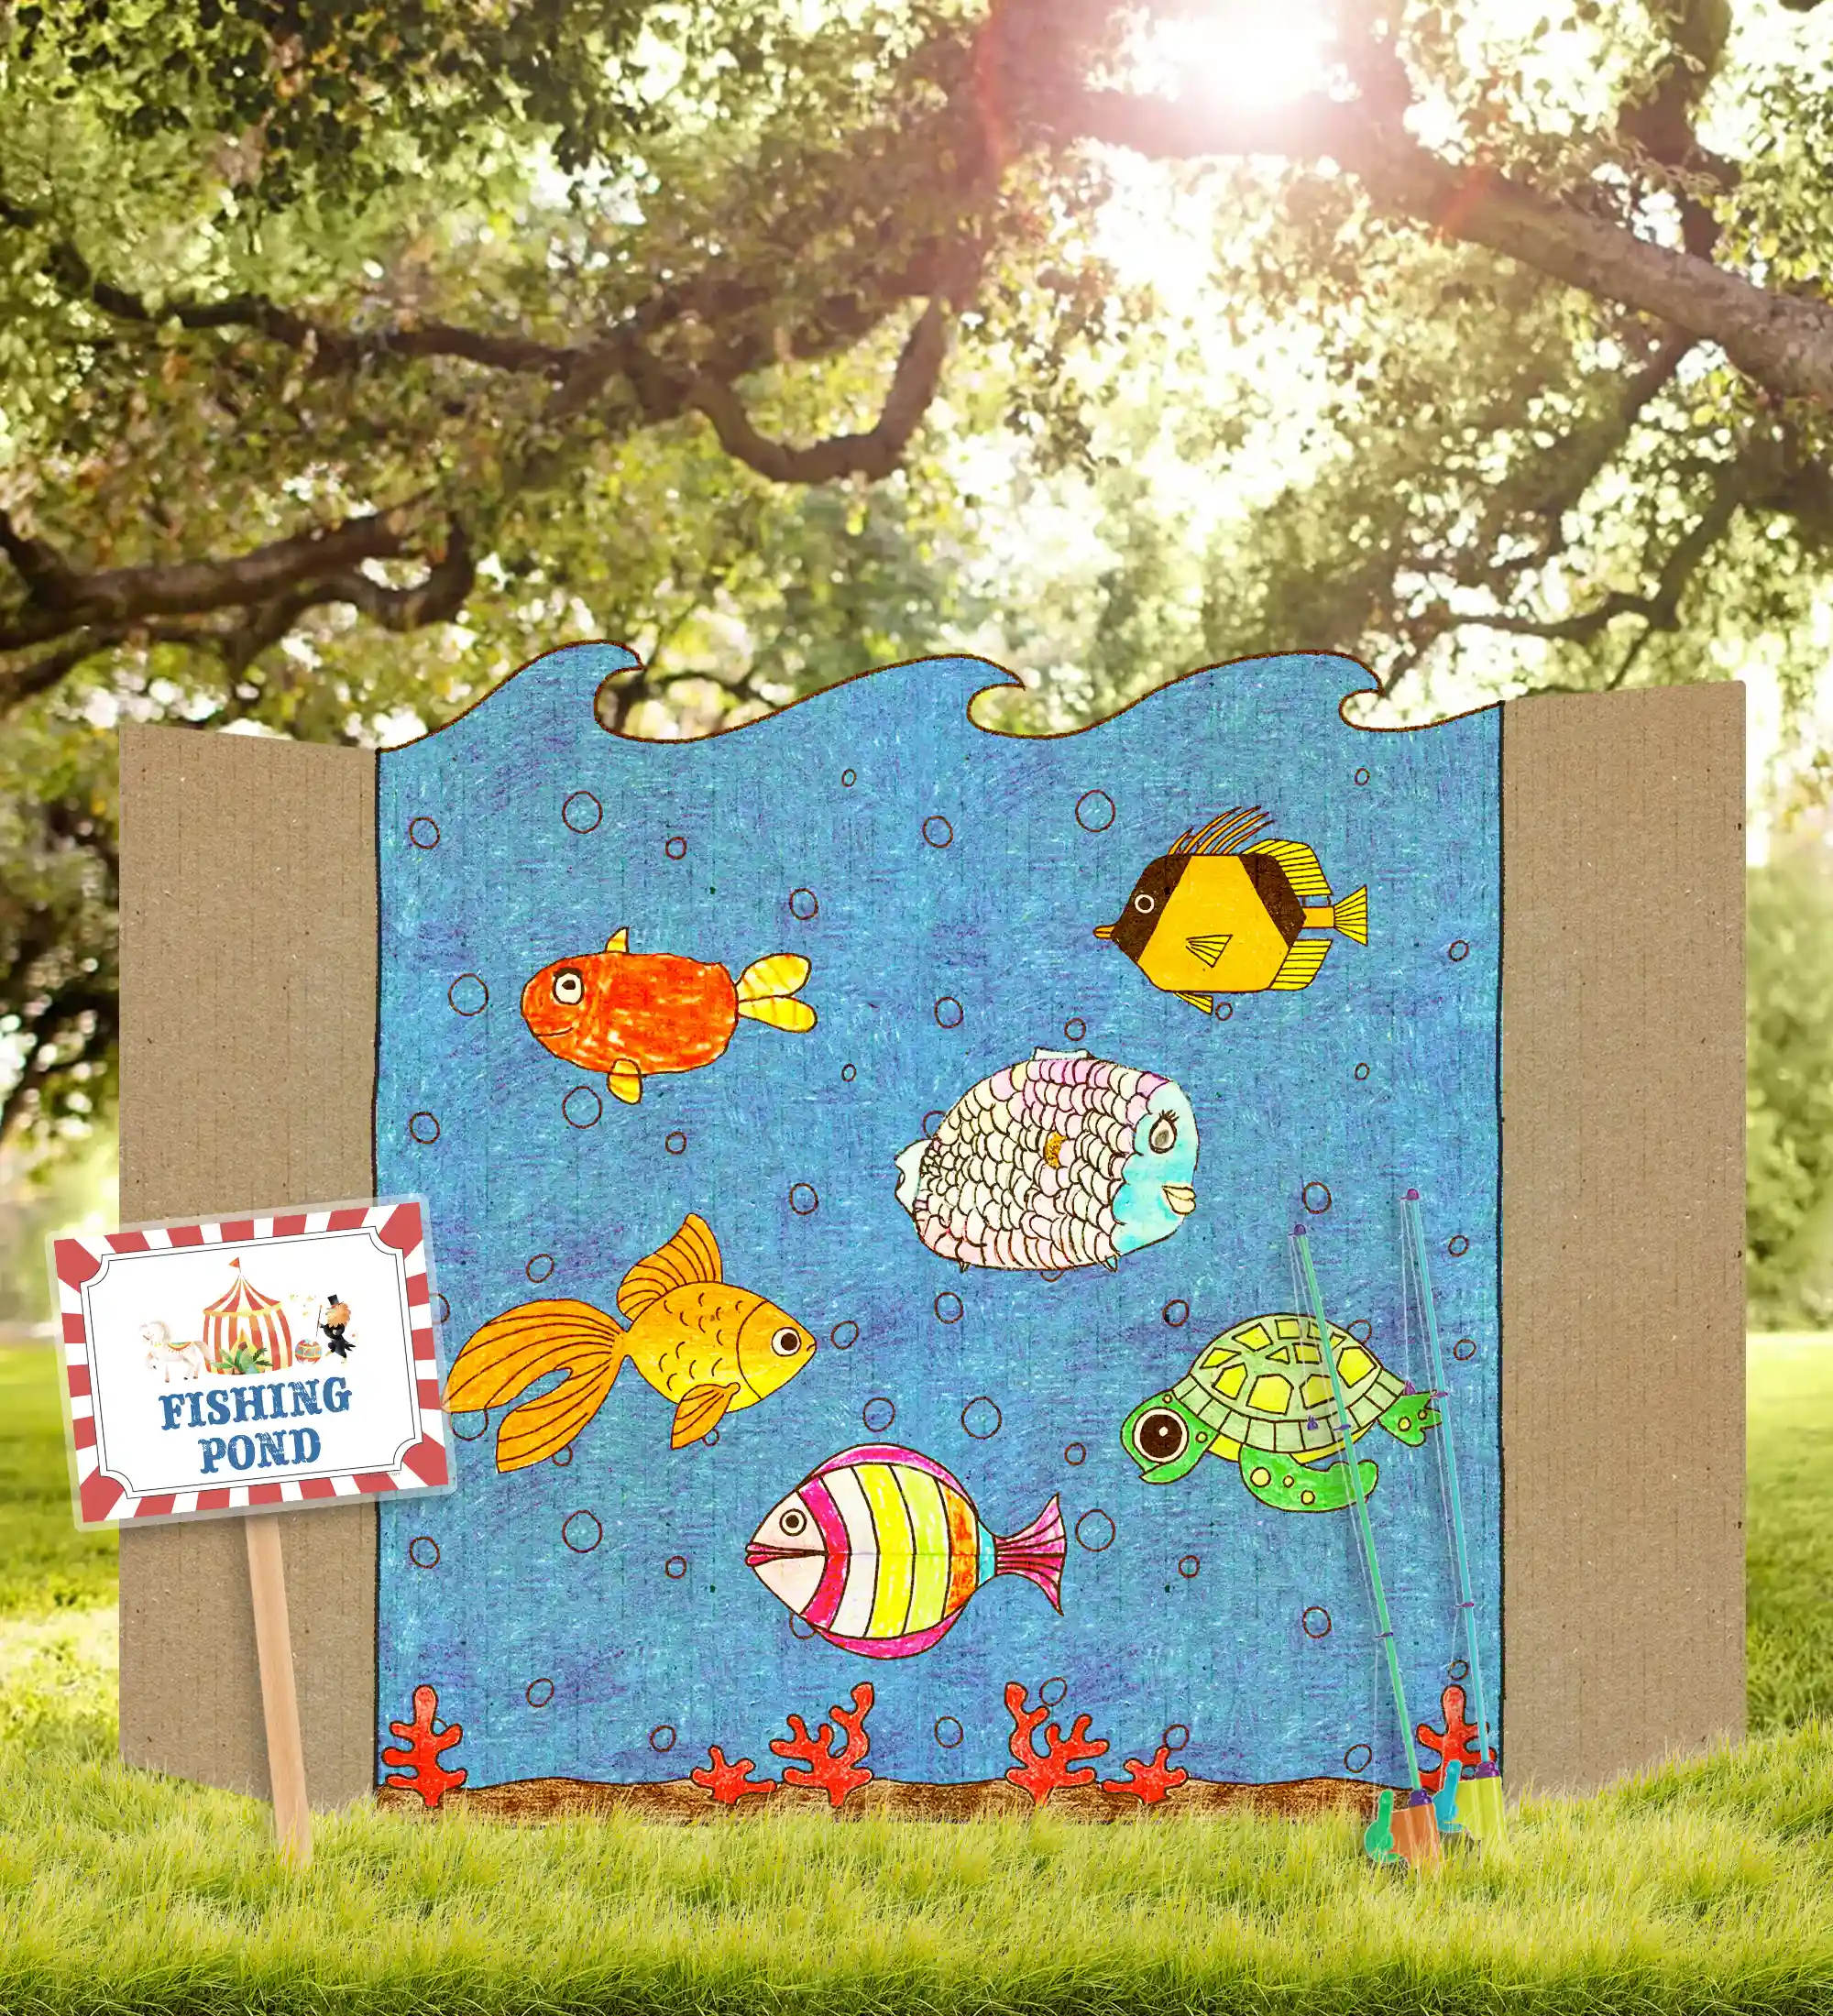 make your own fishing pond booth for your next school carnival or church carnival. Printable signs and party decor for cheap and easy carnival and circus games.